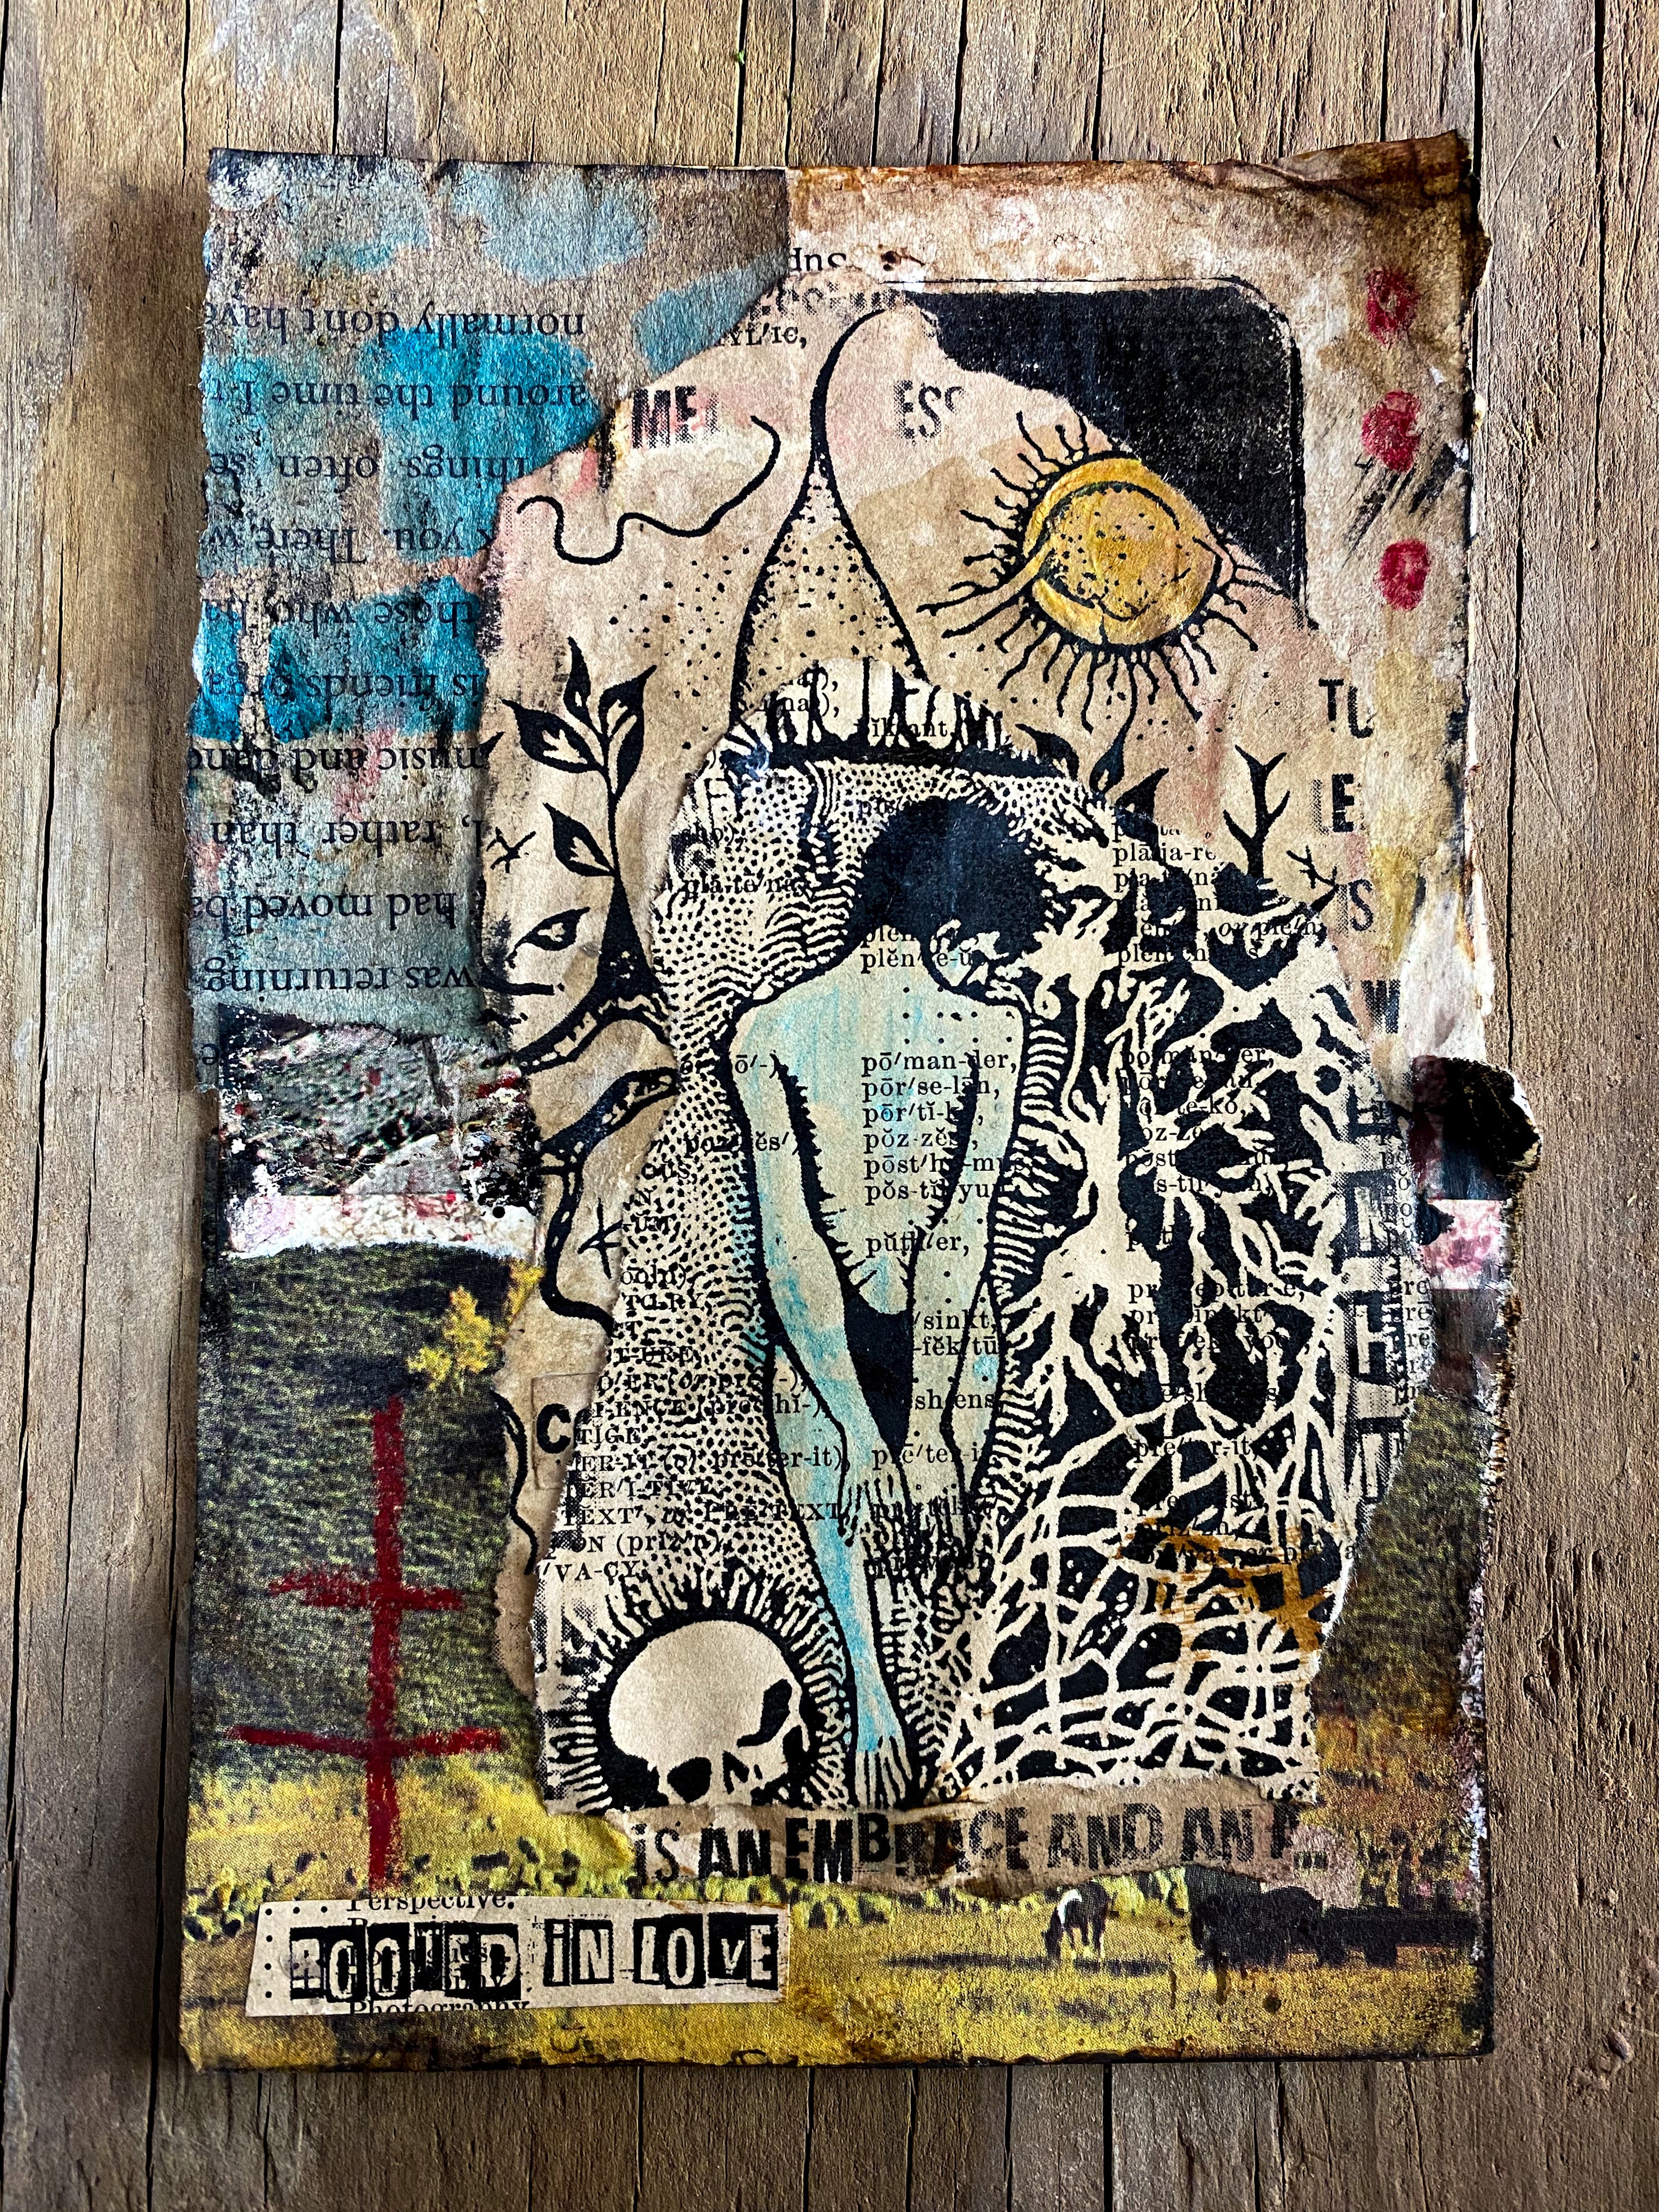 Rooted in Love- Original Mixed Media Collage